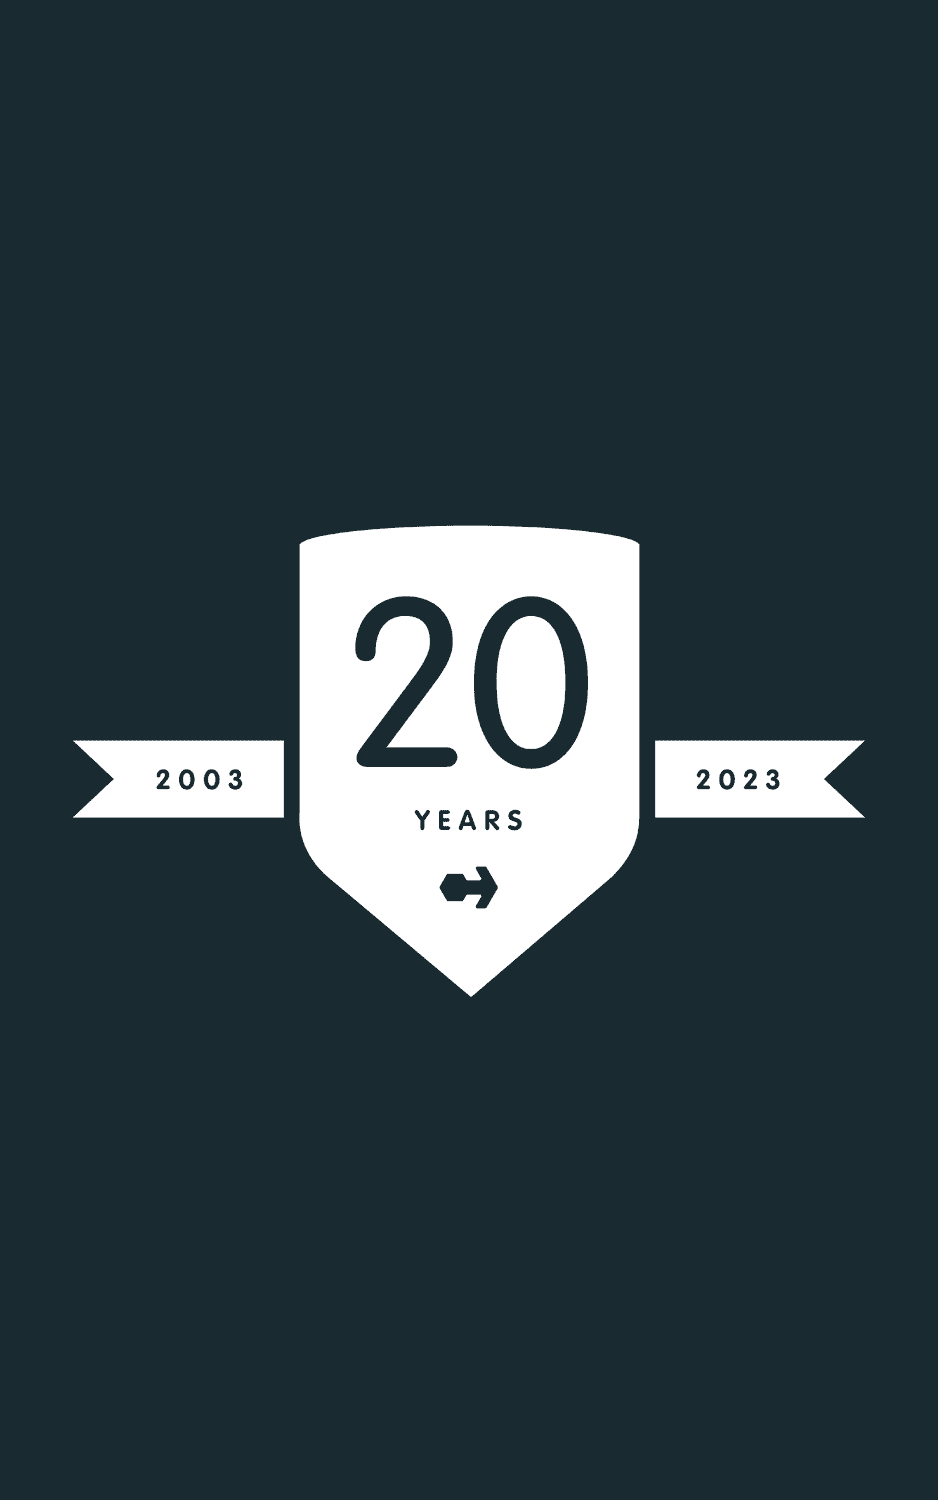 A 20 year badge for CauseLabs anniversary in 2023.